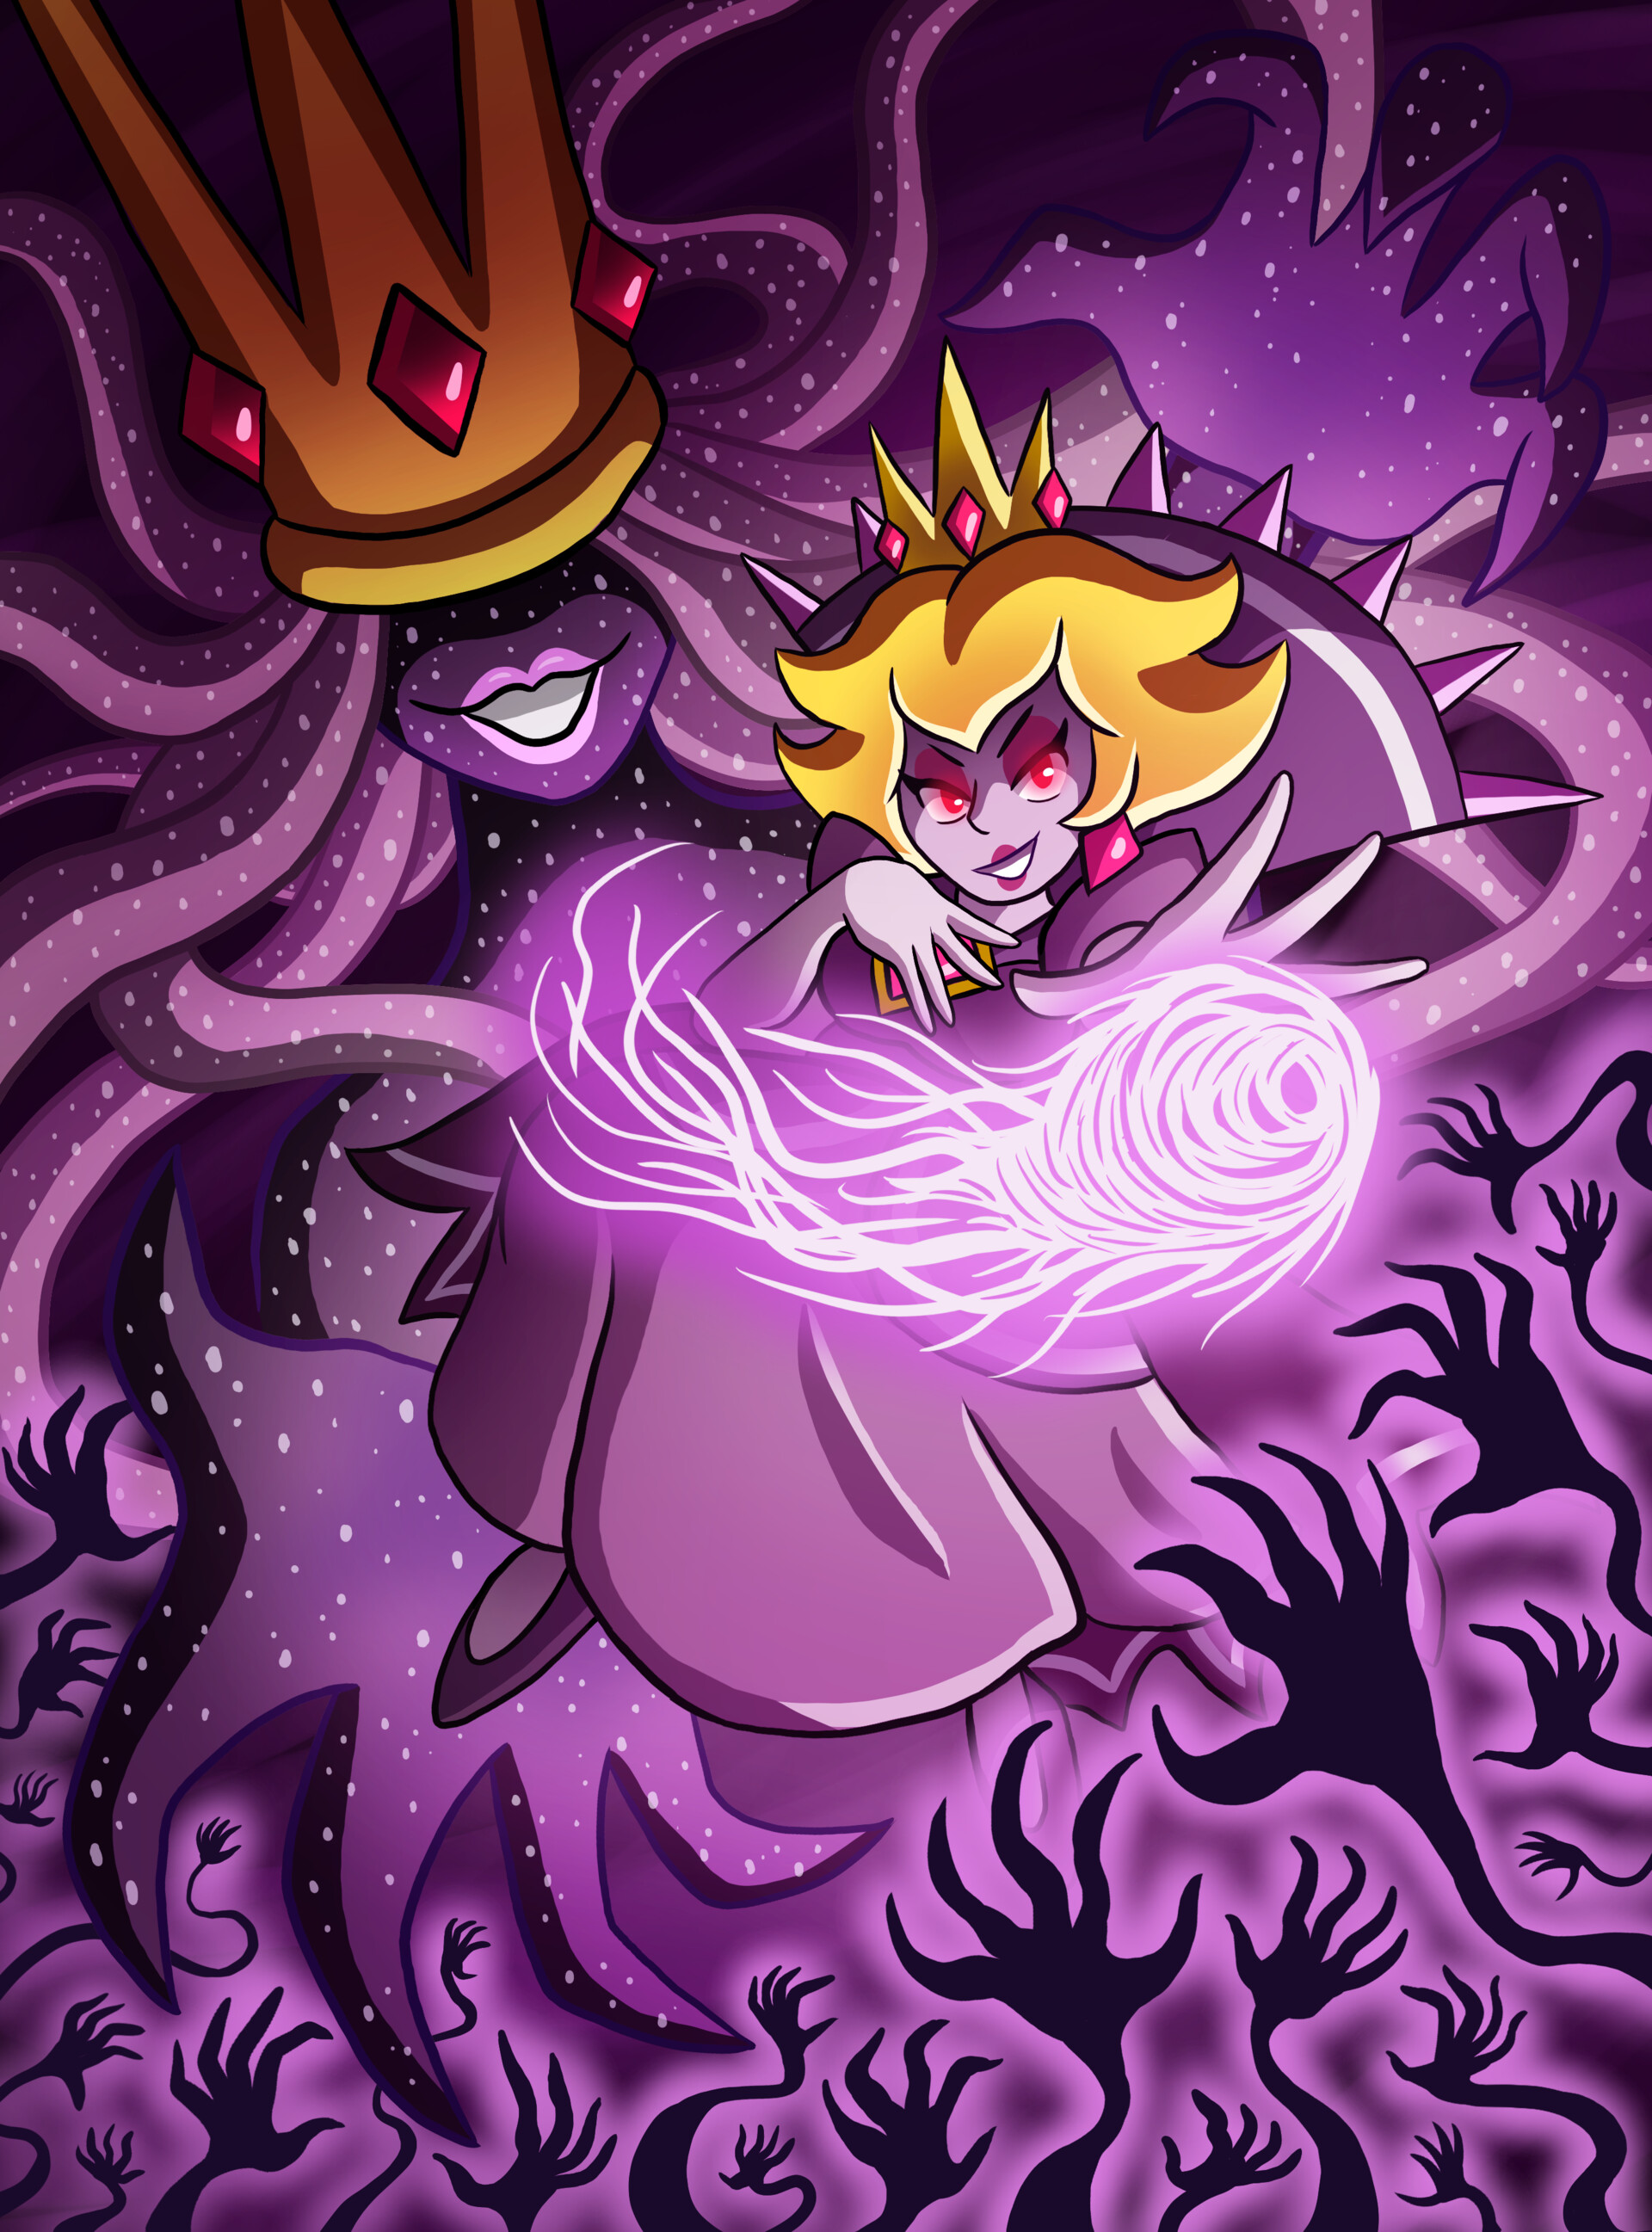 Shadow Queen-possessed Peach from Paper Mario: The Thousand Year Door.